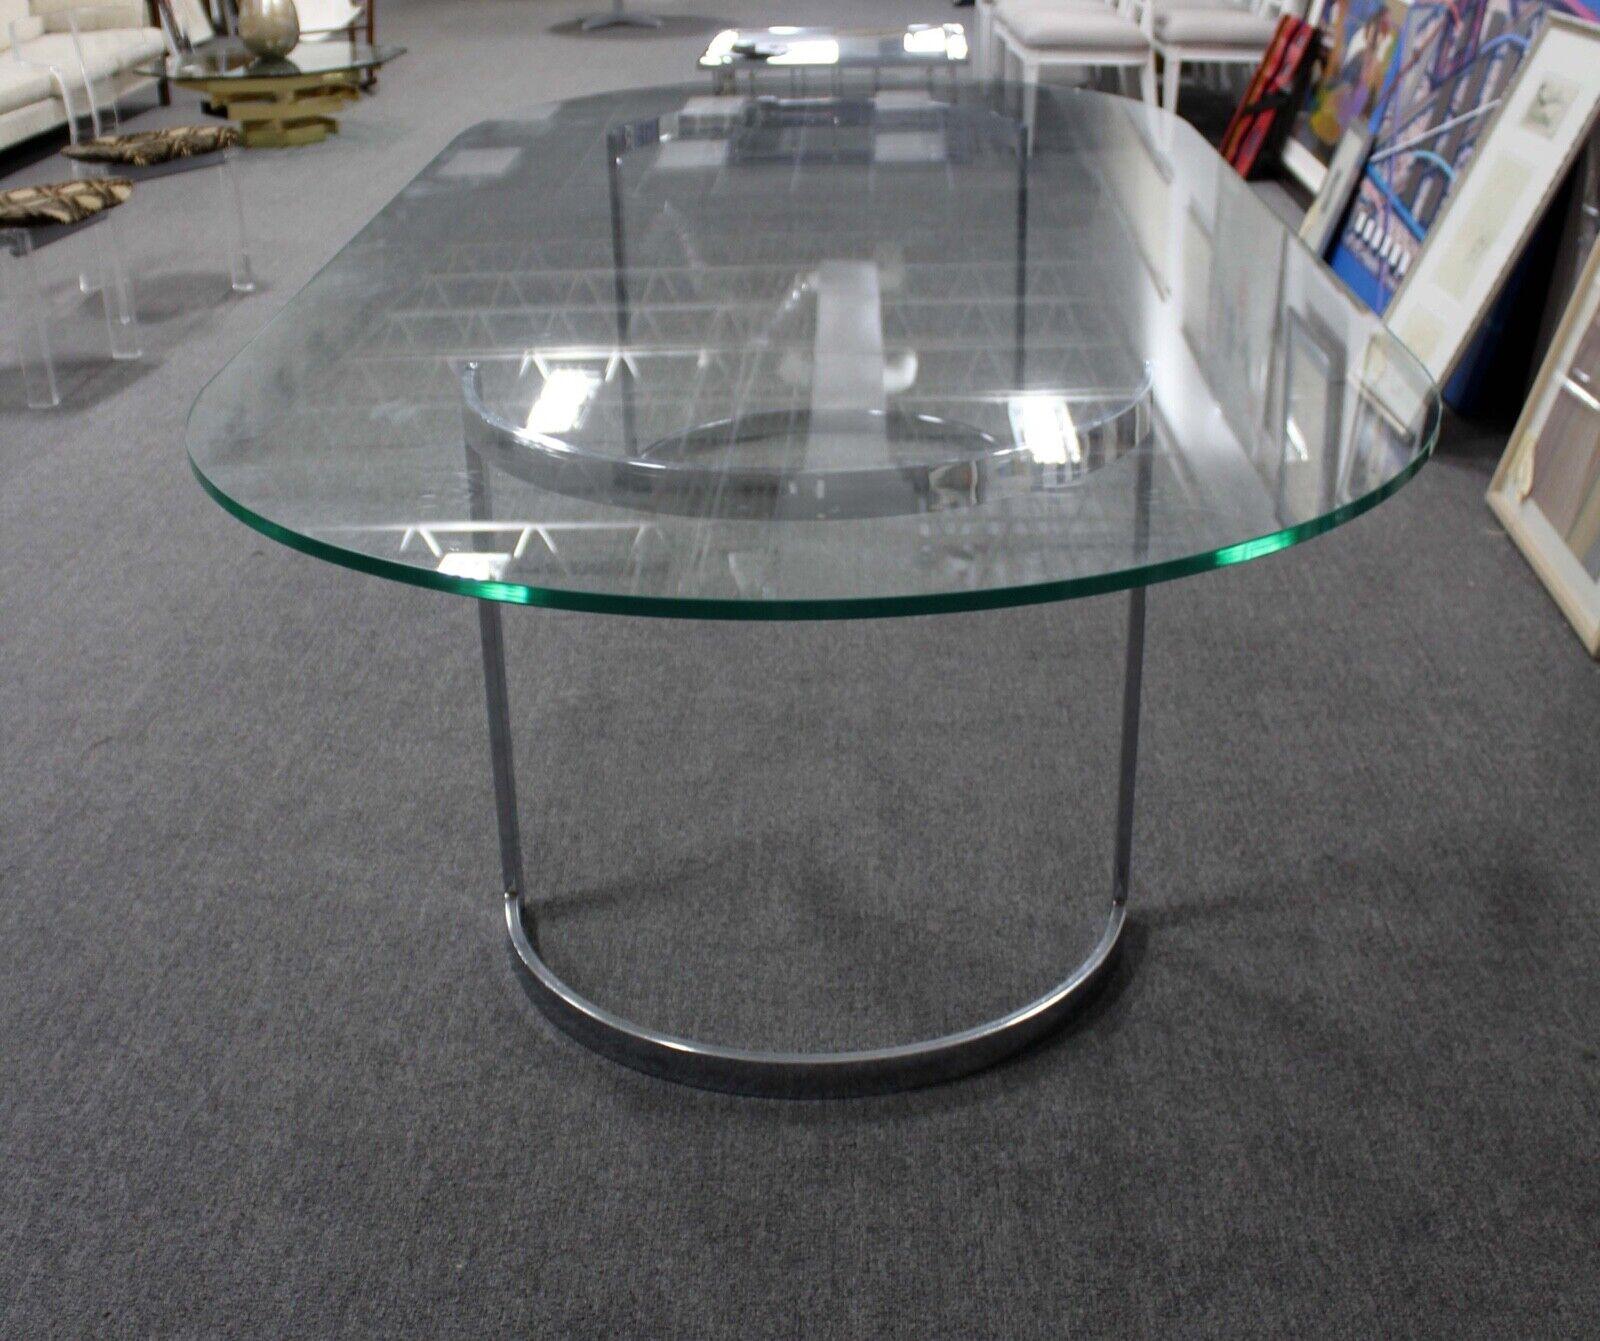 For your consideration is this monumental 10 foot glass dining table on curved chrome bases attributed to Milo Baughman. Dimensions: 119.5w x 55.5d x 30h.
 